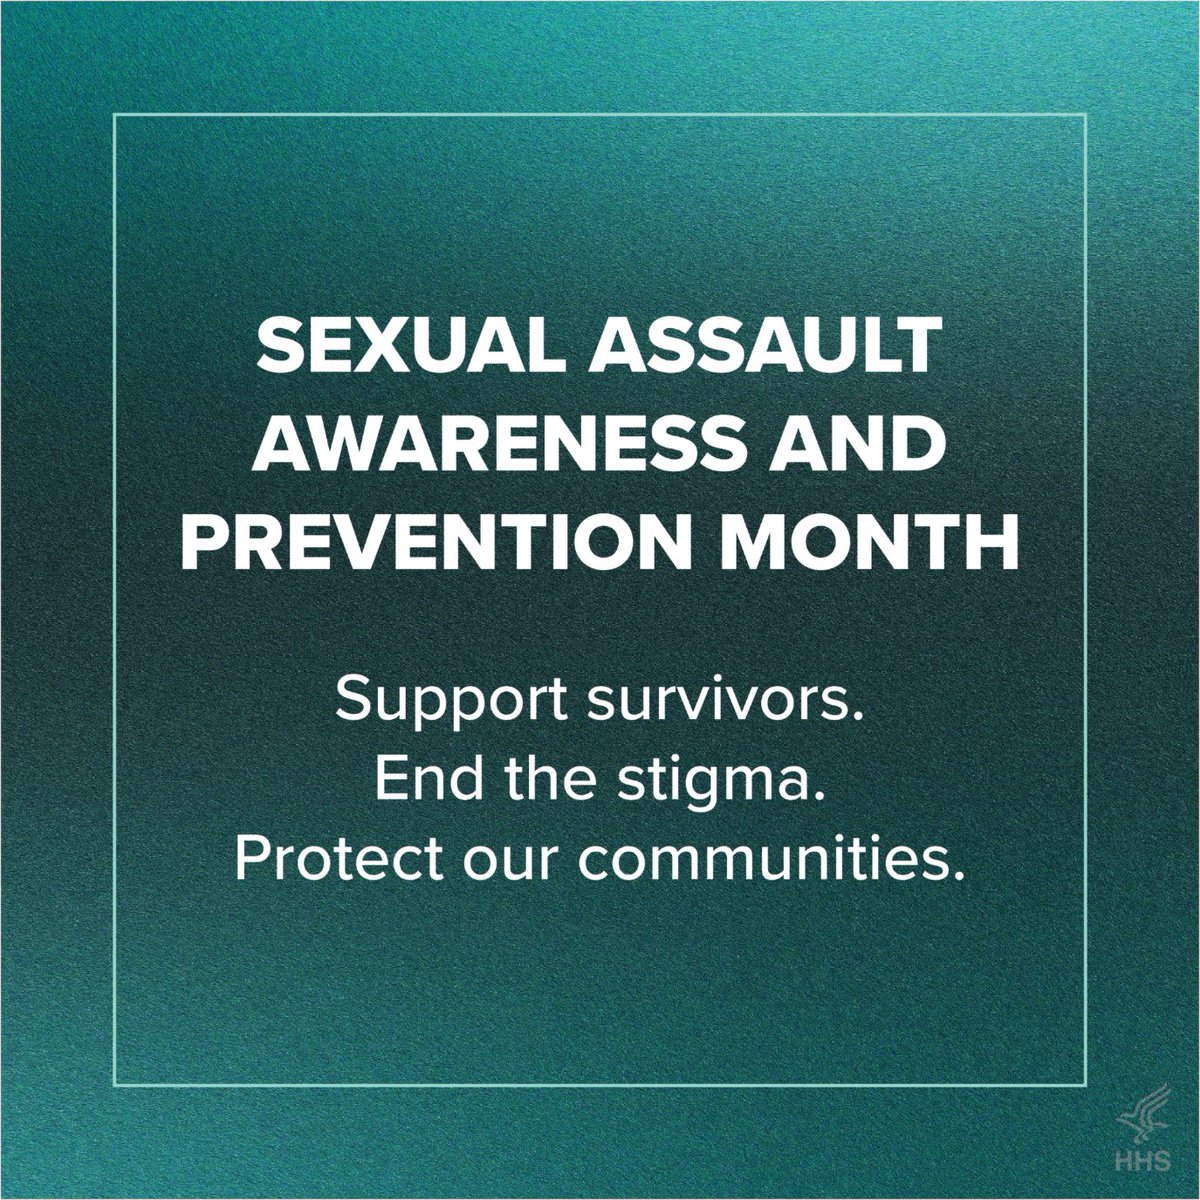 To prevent sexual assault in our communities, we can create safe environments, promote social norms that protect against violence, empower women, and support survivors. Learn more: bit.ly/3IXFpse #SAAPM @CDCgov